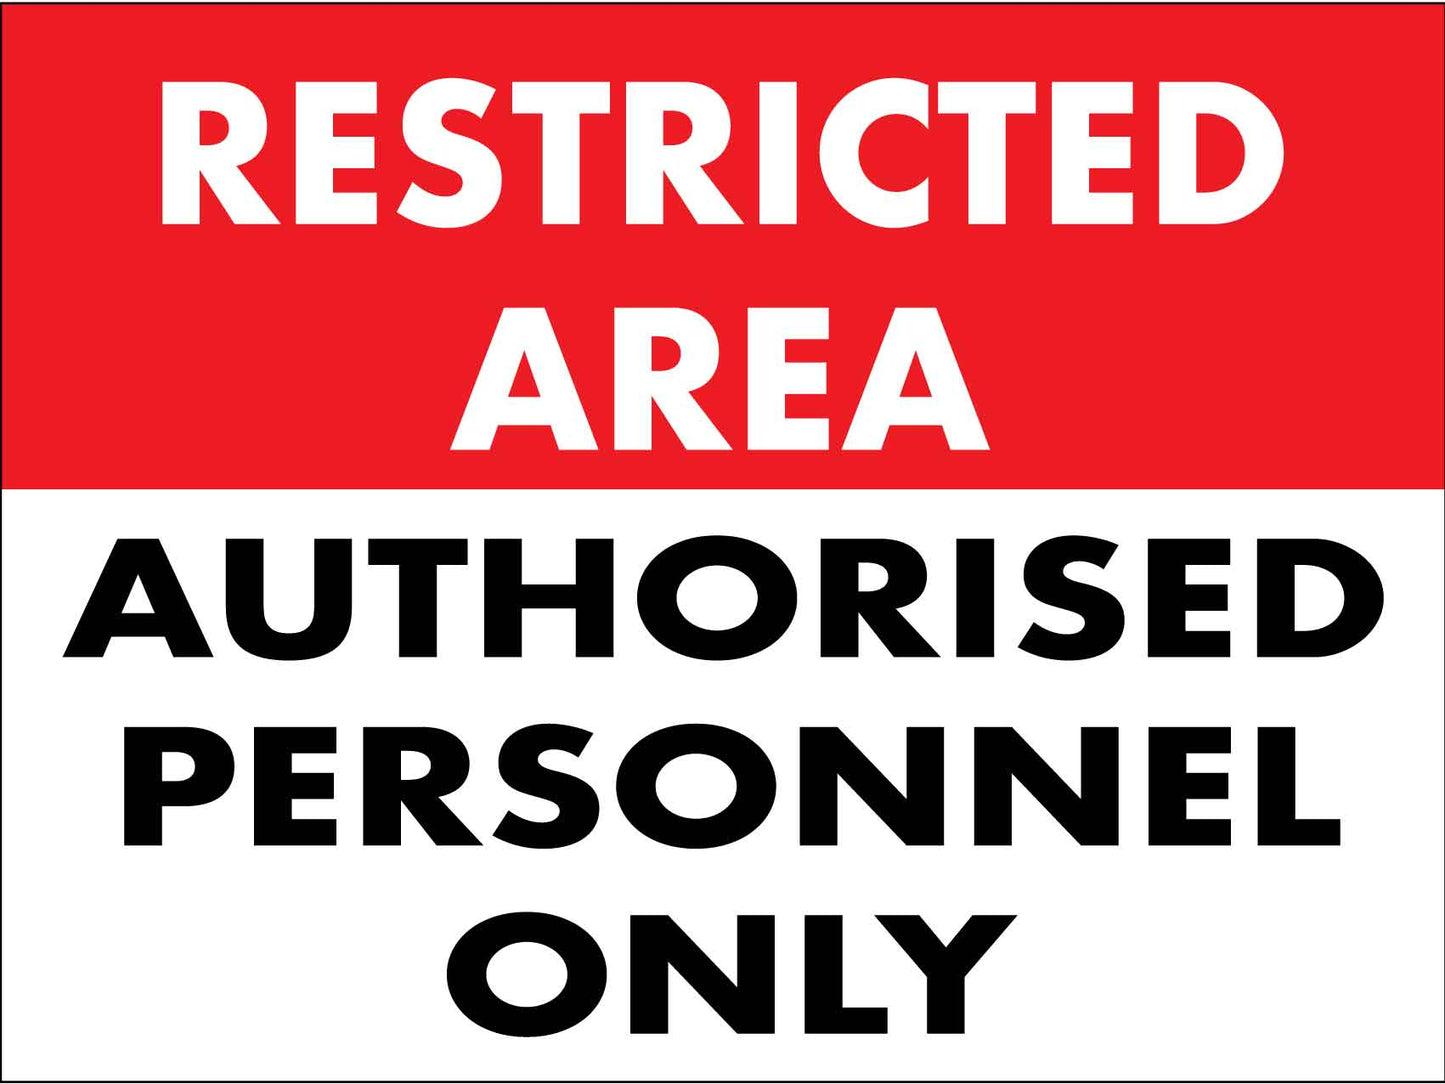 Restricted Area Authorised Personnel Only Sign